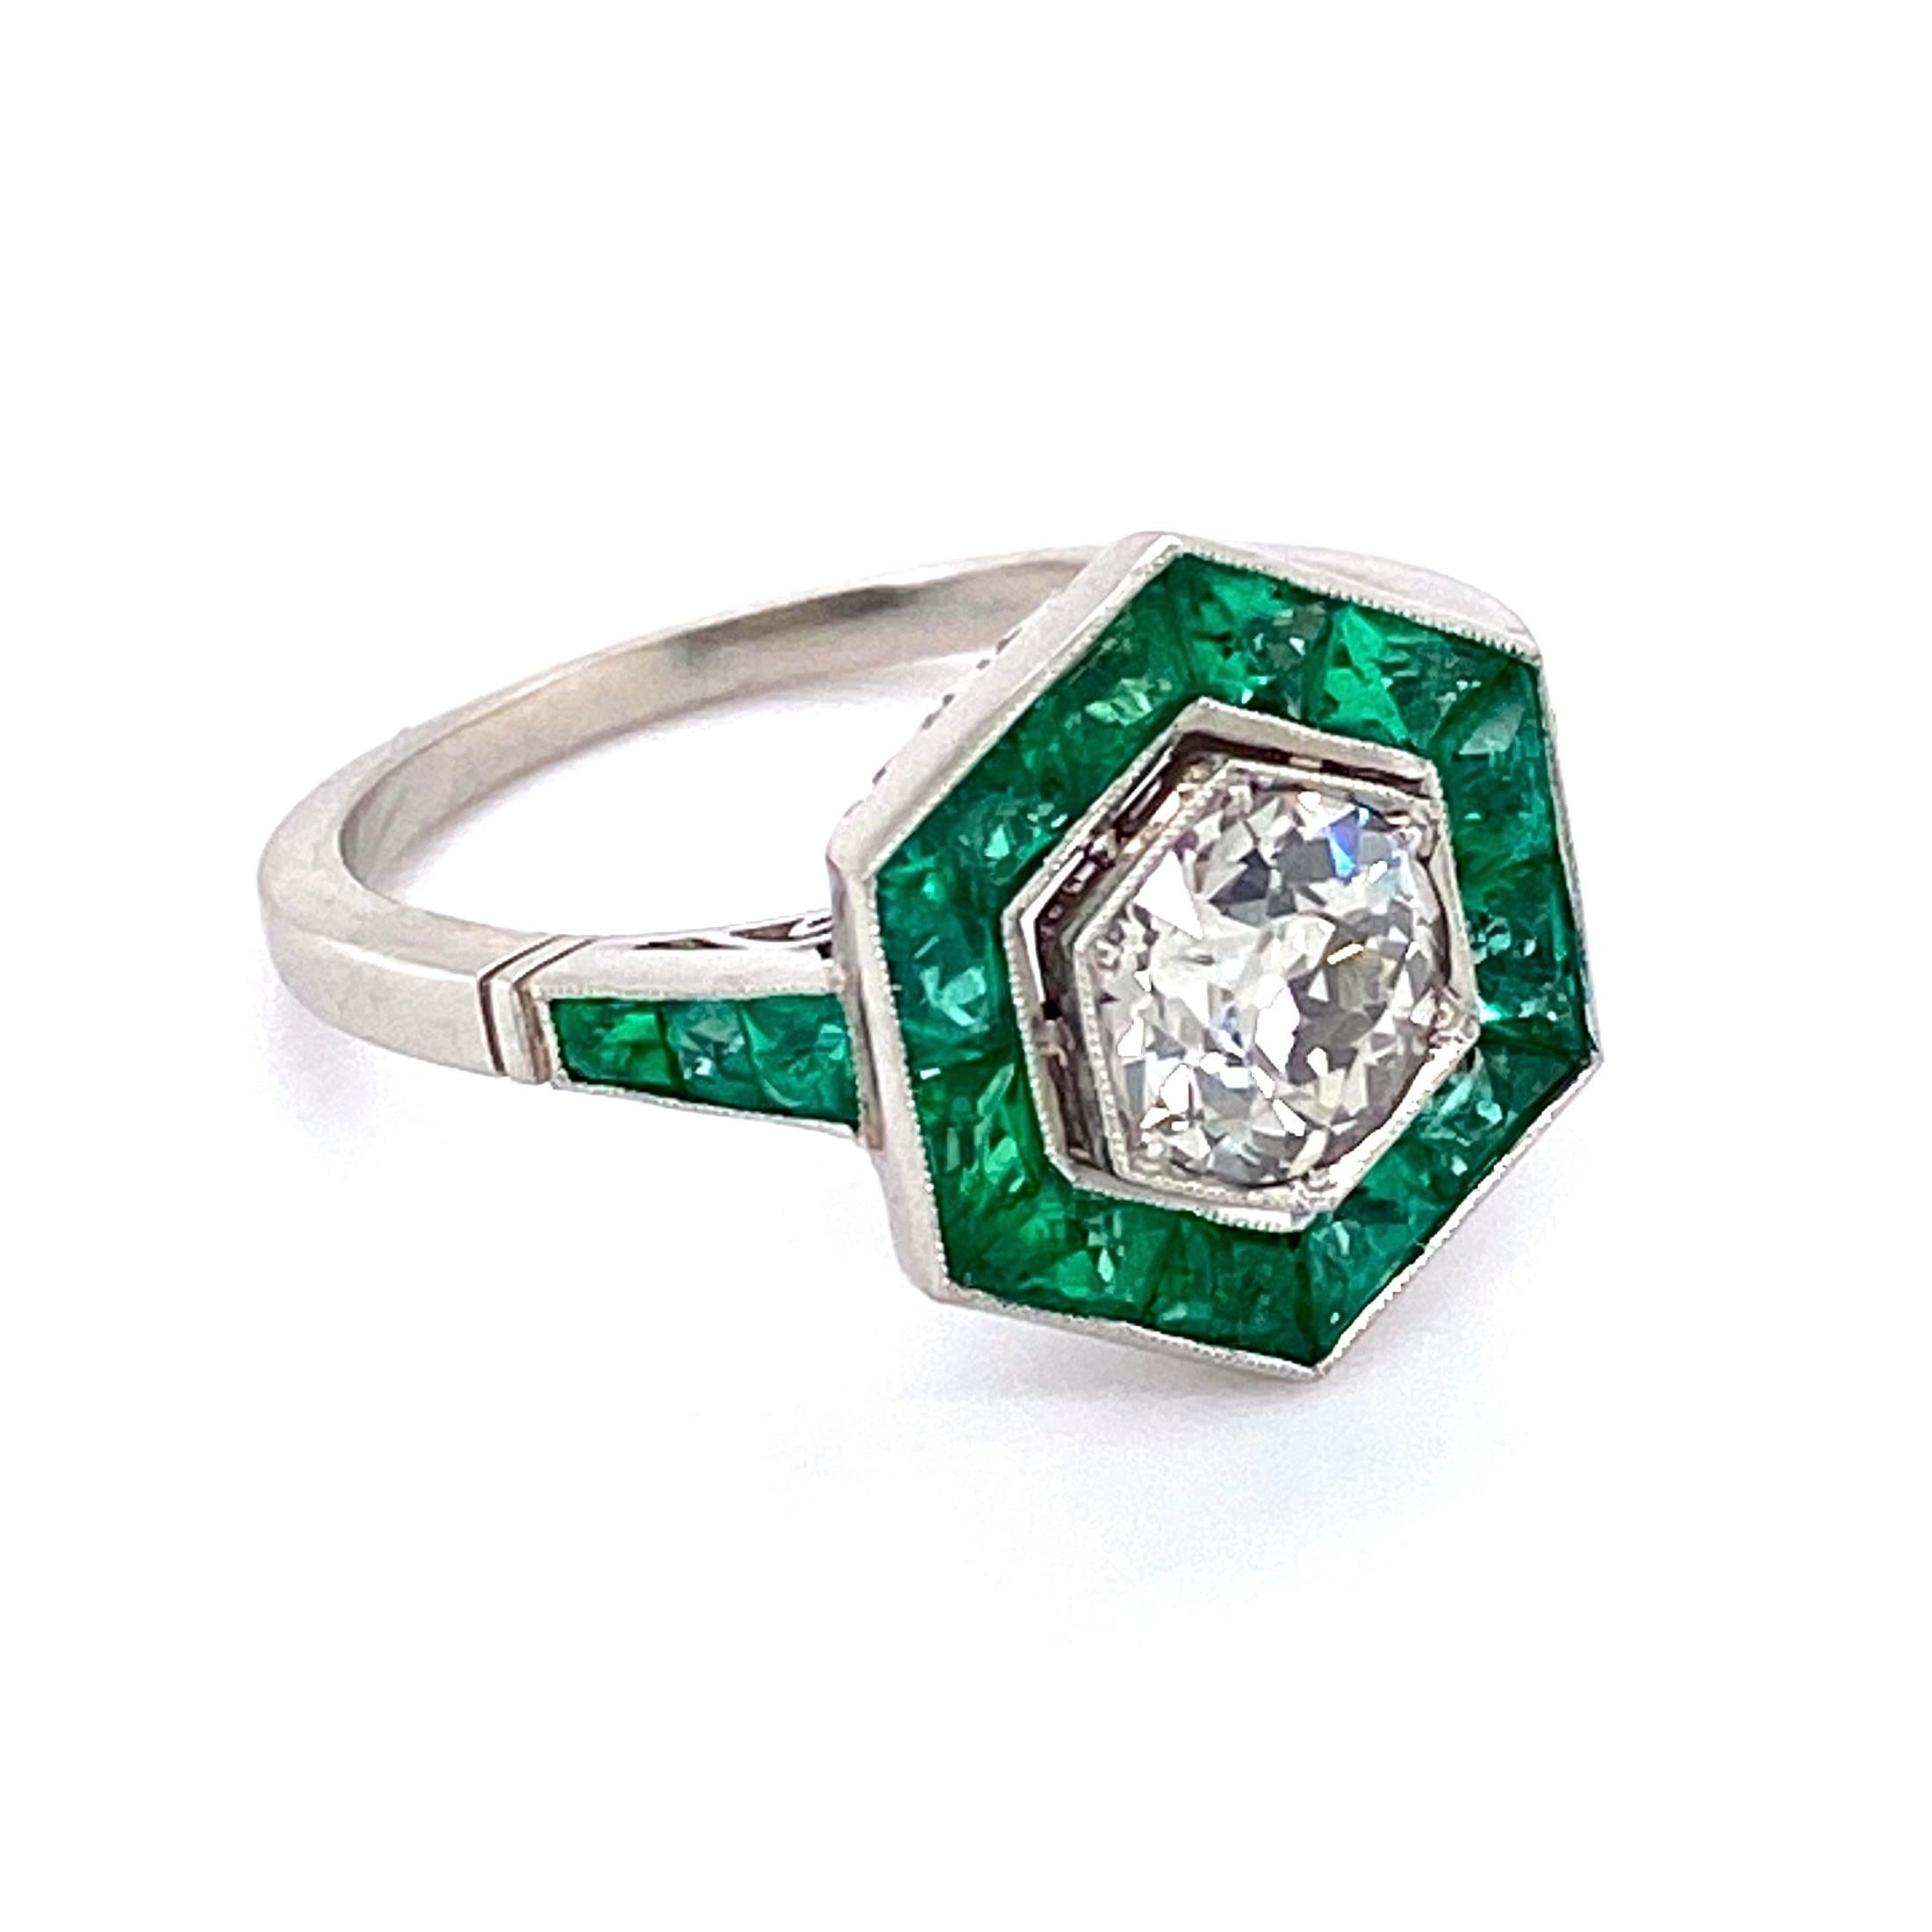 Elegant & finely detailed Cocktail Ring, center set with an Old European Cut Diamond, approx. 0.90 Carat; color J; clarity VS, surrounded by Emeralds weighing approx. 2.60 Carats, total weight. Hand crafted in Platinum in hexagon form. The ring